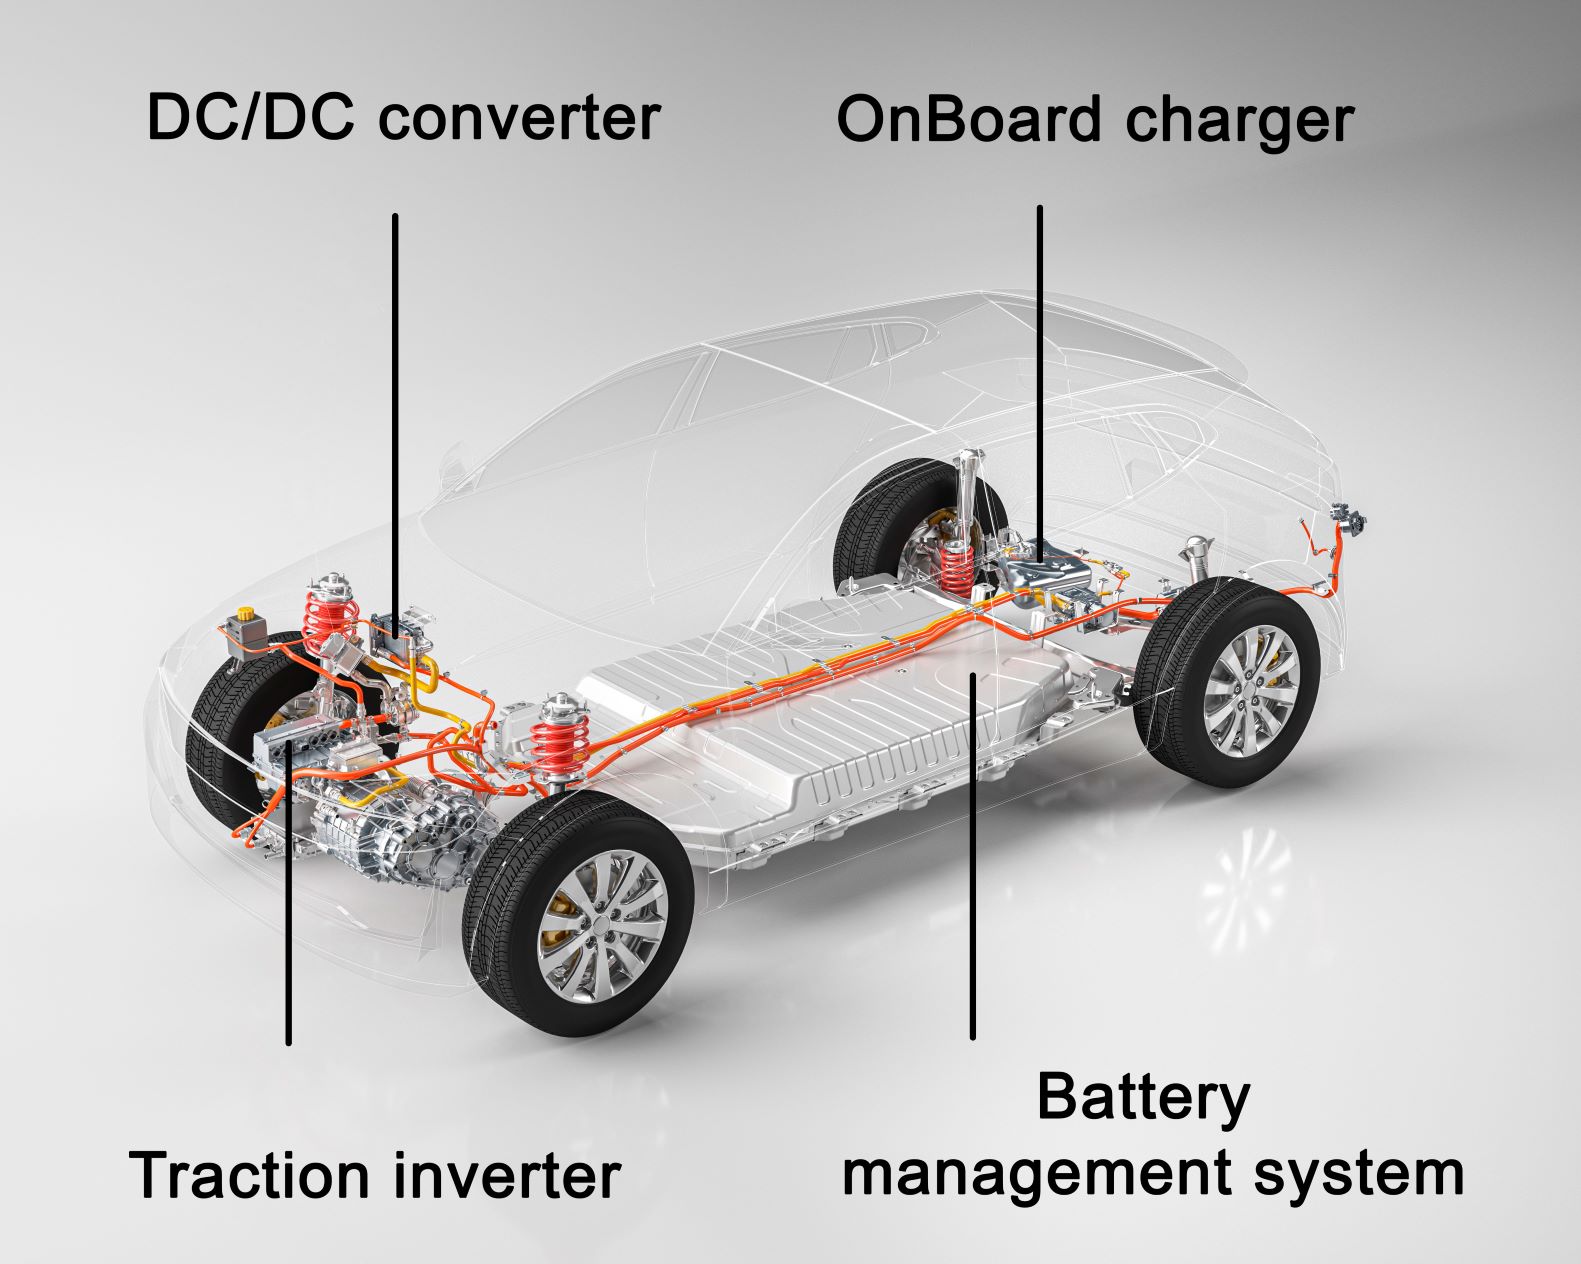 car with the following components labeled, DC/DC voncerter, traction inverter, onBoard charger, battery management system